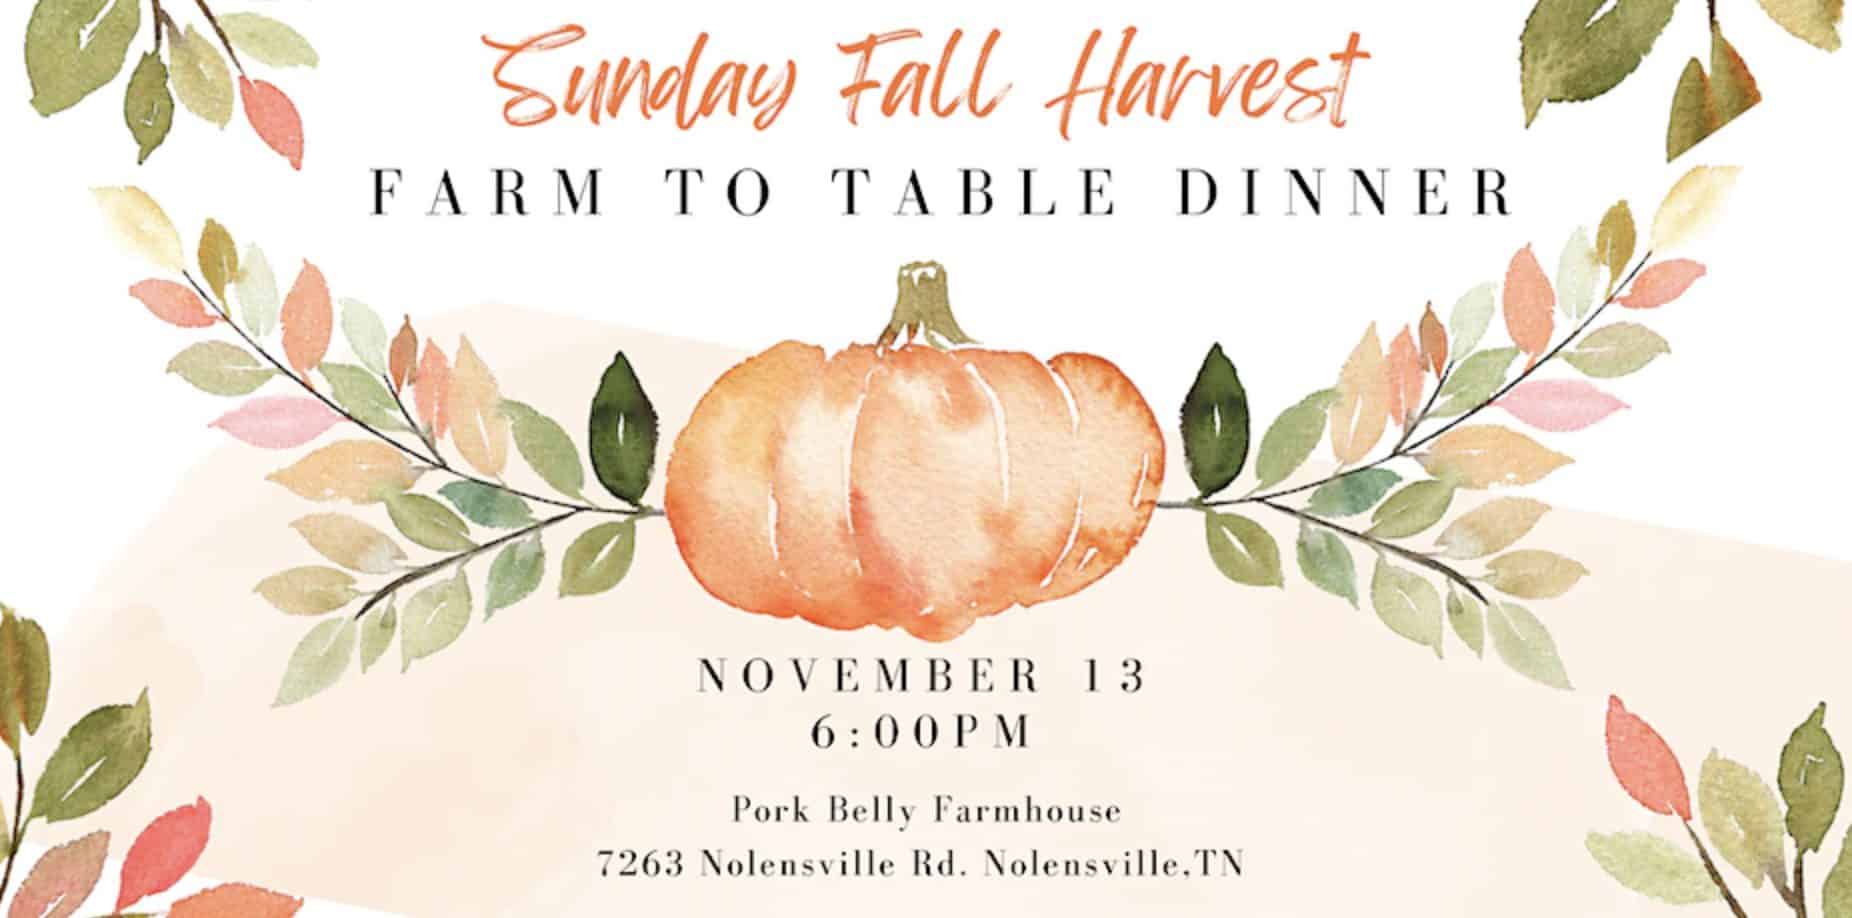 Sunday Harvest Supper, a Nolensville, TN event, the Nolensville Farmers Market is excited to partner with the culinary team at Pork Belly Farmhouse to bring you a taste of the fall harvest.